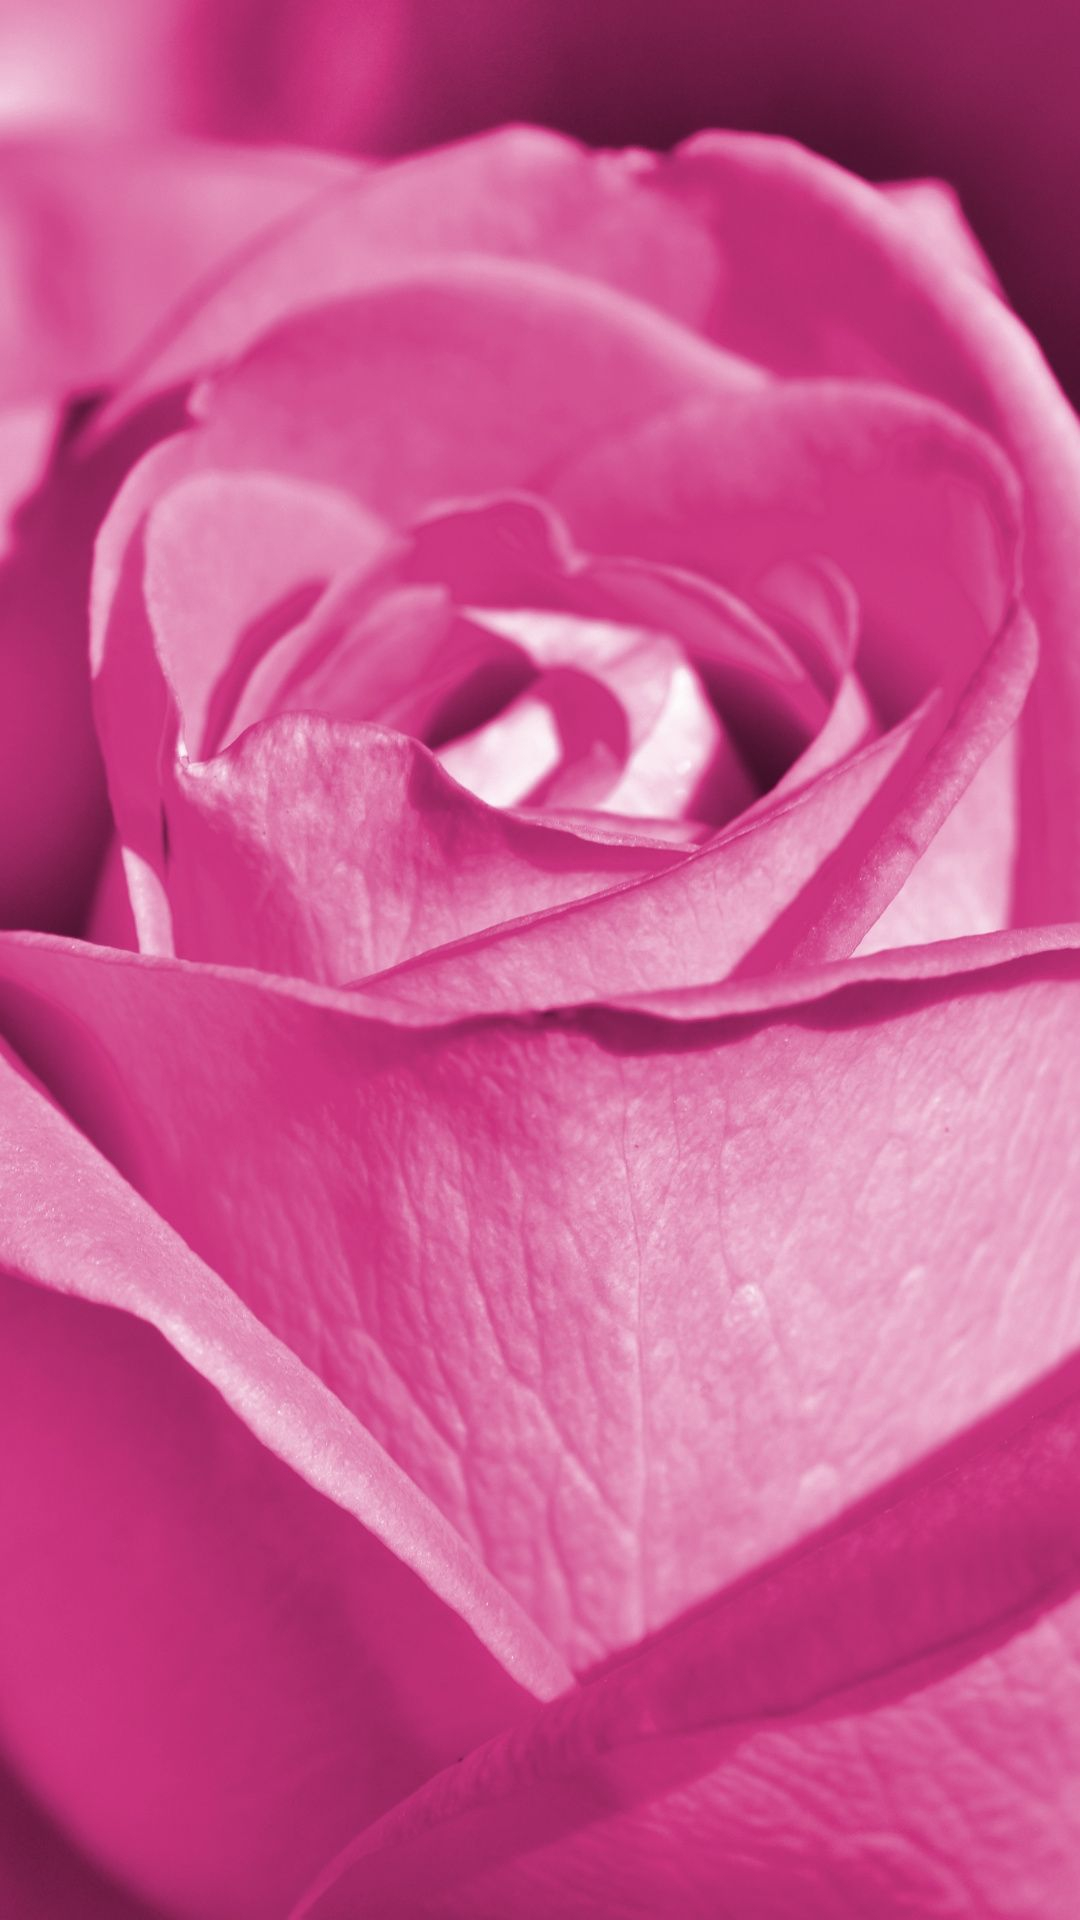 1080x1920 Pink rose, close up, bloom Wallpaper | Purple roses wallpaper, Best flowers images, Beautiful flowers wallpapers